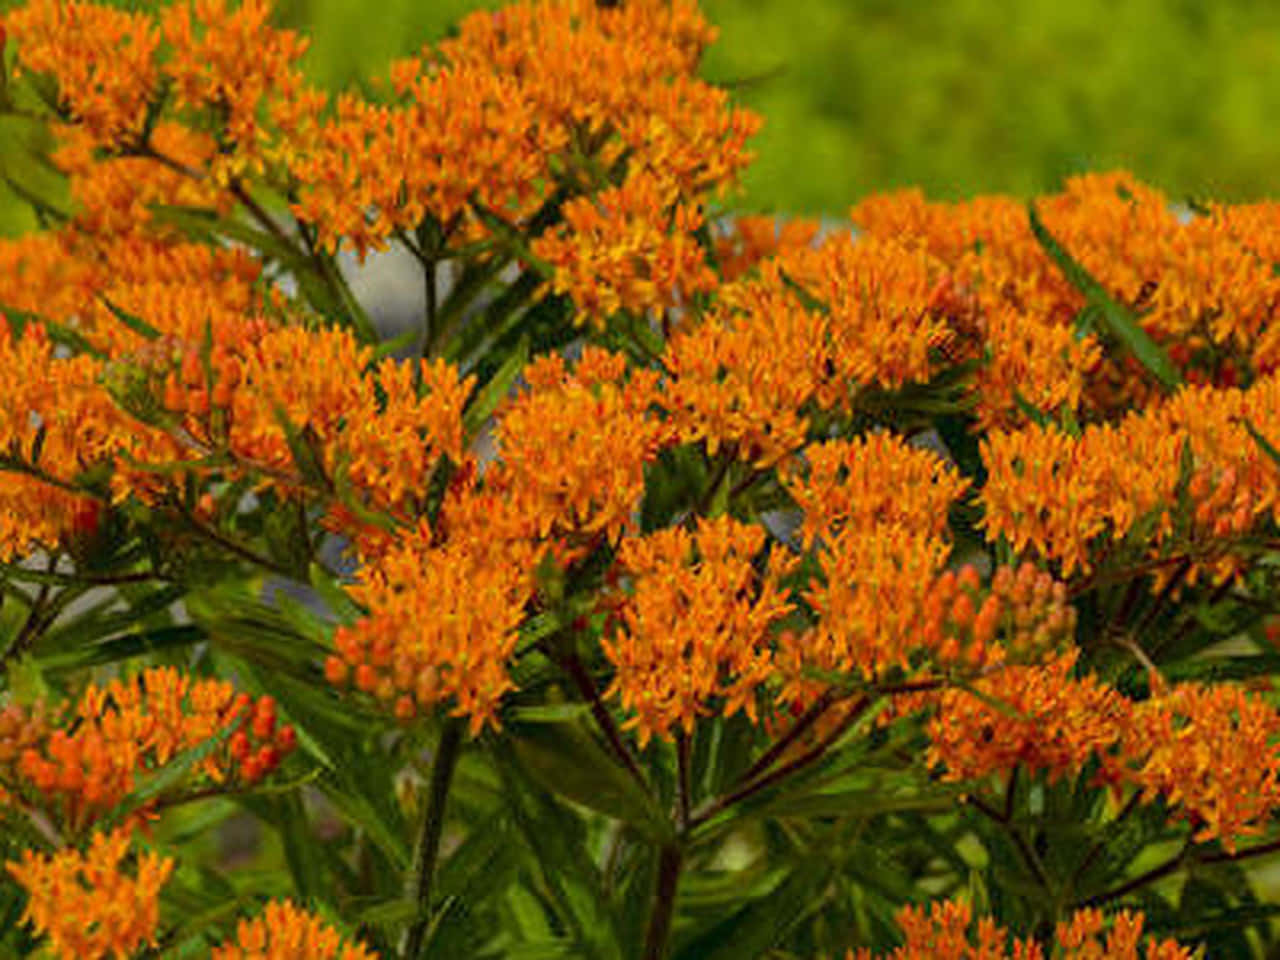 A monarch butterfly enjoys a meal of nectar from the butterfly weed" Wallpaper